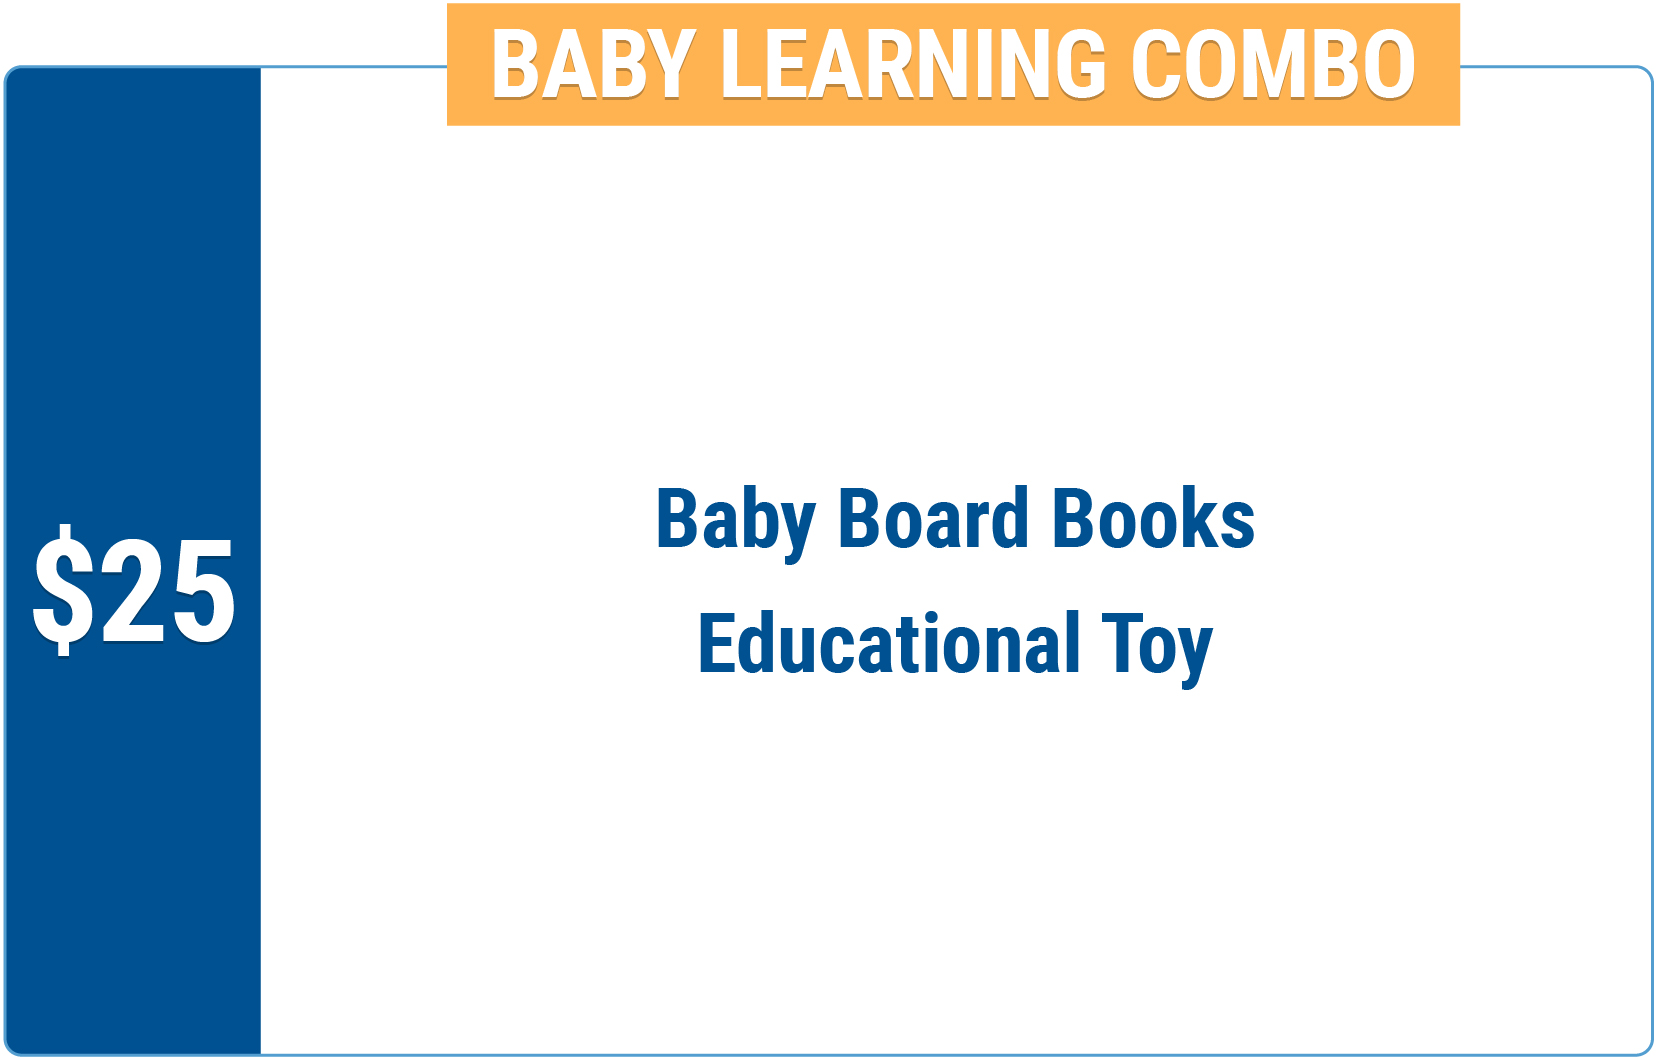 25$ Donation equals Baby Board Books, Educational Toy